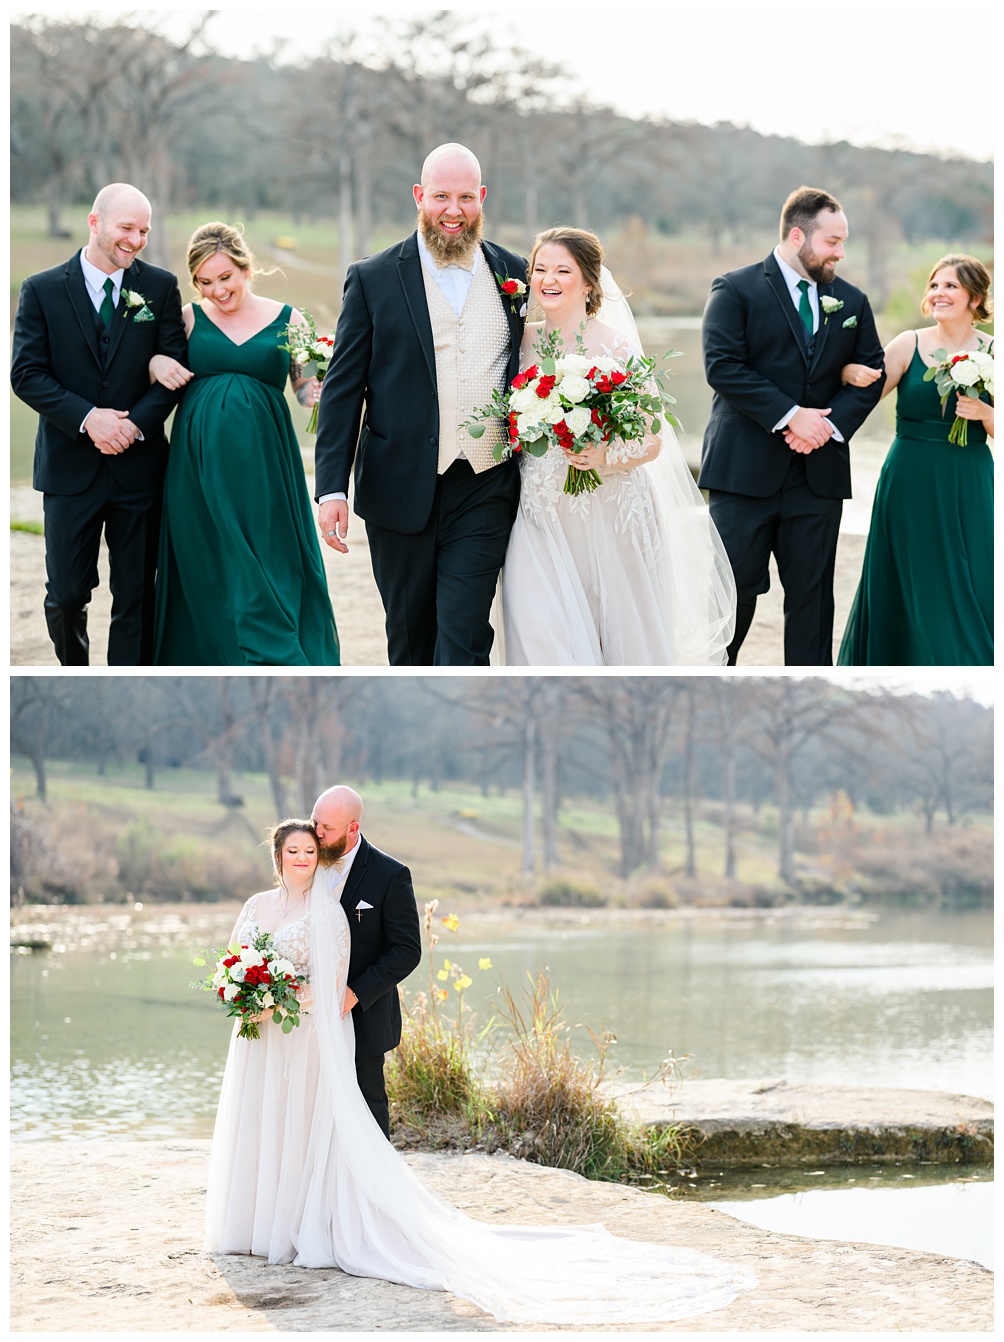 Winter wedding at The Waters Point in Wimberley with bridesmaids in hunter green dresses